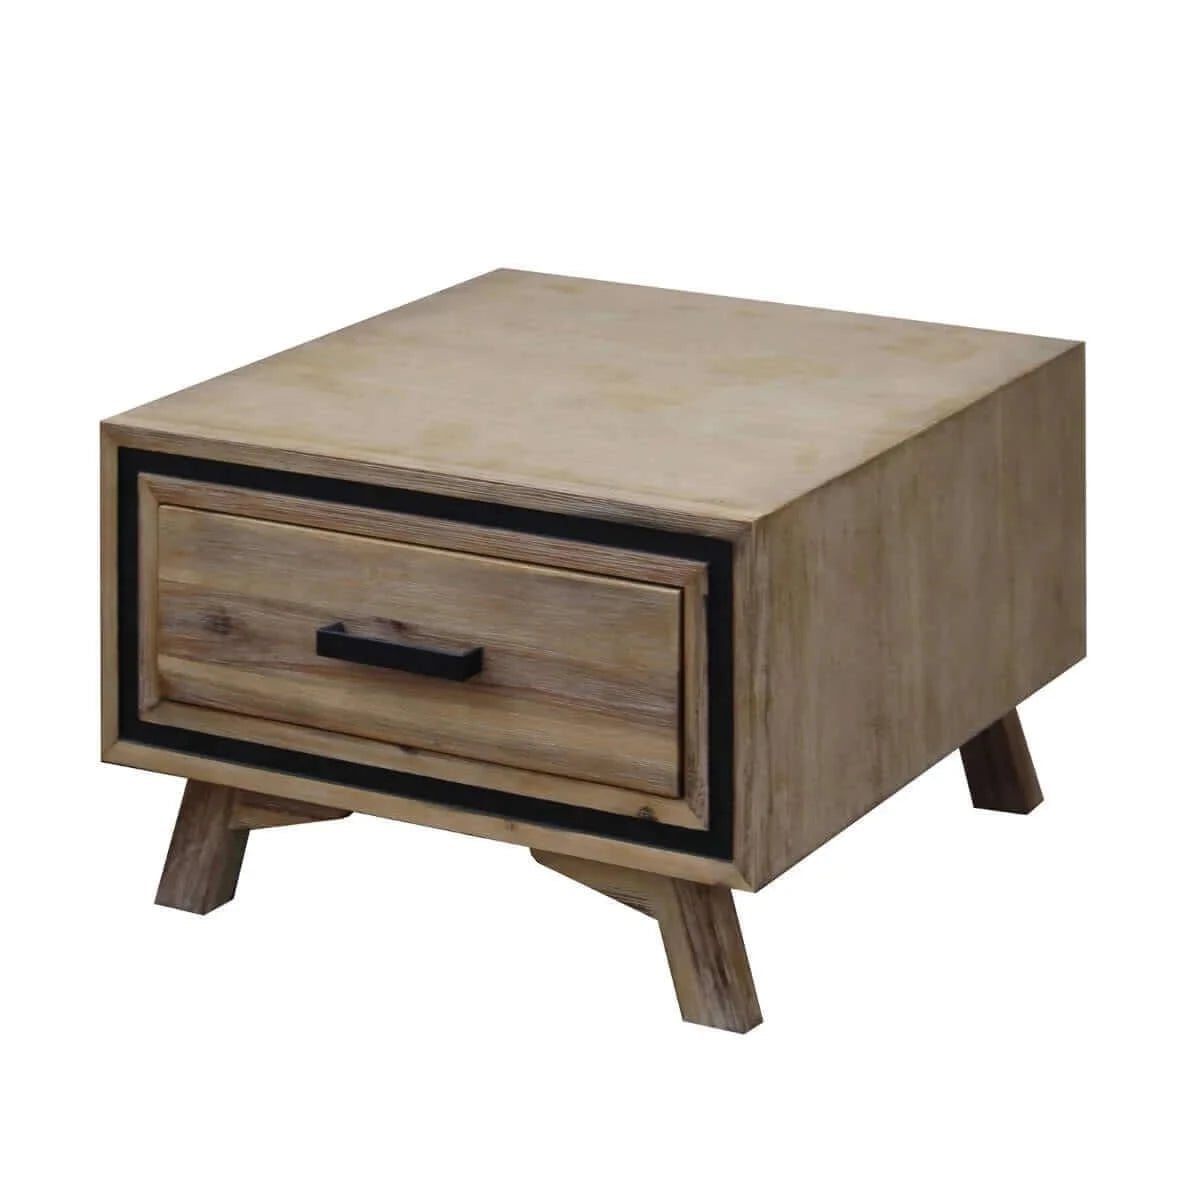 Lamp Table with 1 Storage Drawer Solid Wooden Frame in Silver Brush Colour-Upinteriors